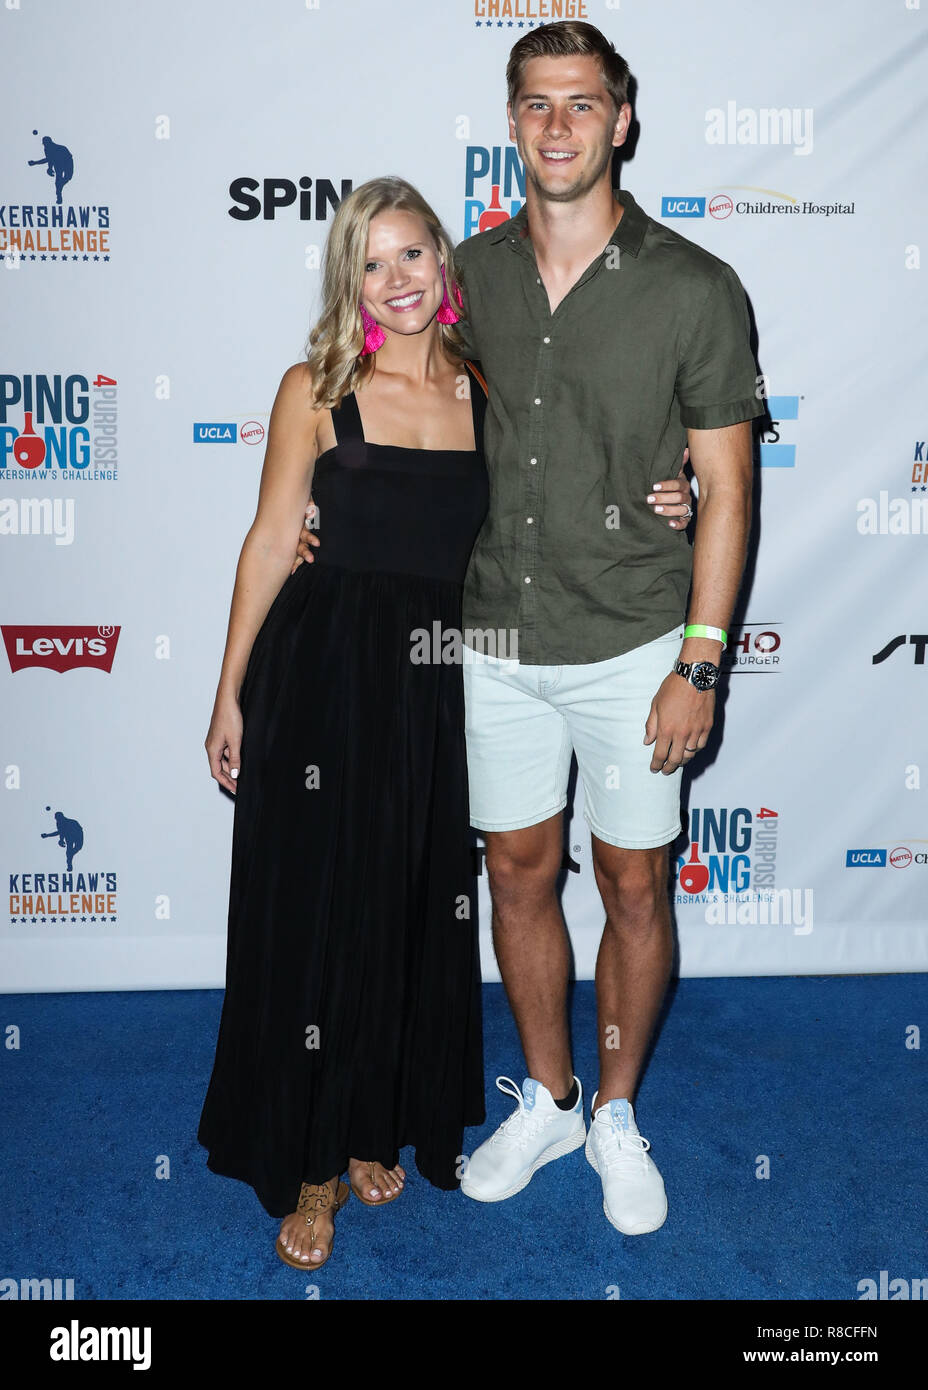 LOS ANGELES, CA, USA - AUGUST 23: Sally Tucker, Walker Zimmerman at the 6th Annual PingPong4Purpose held at Dodger Stadium on August 23, 2018 in Los Angeles, California, United States. (Photo by Xavier Collin/Image Press Agency) Stock Photo